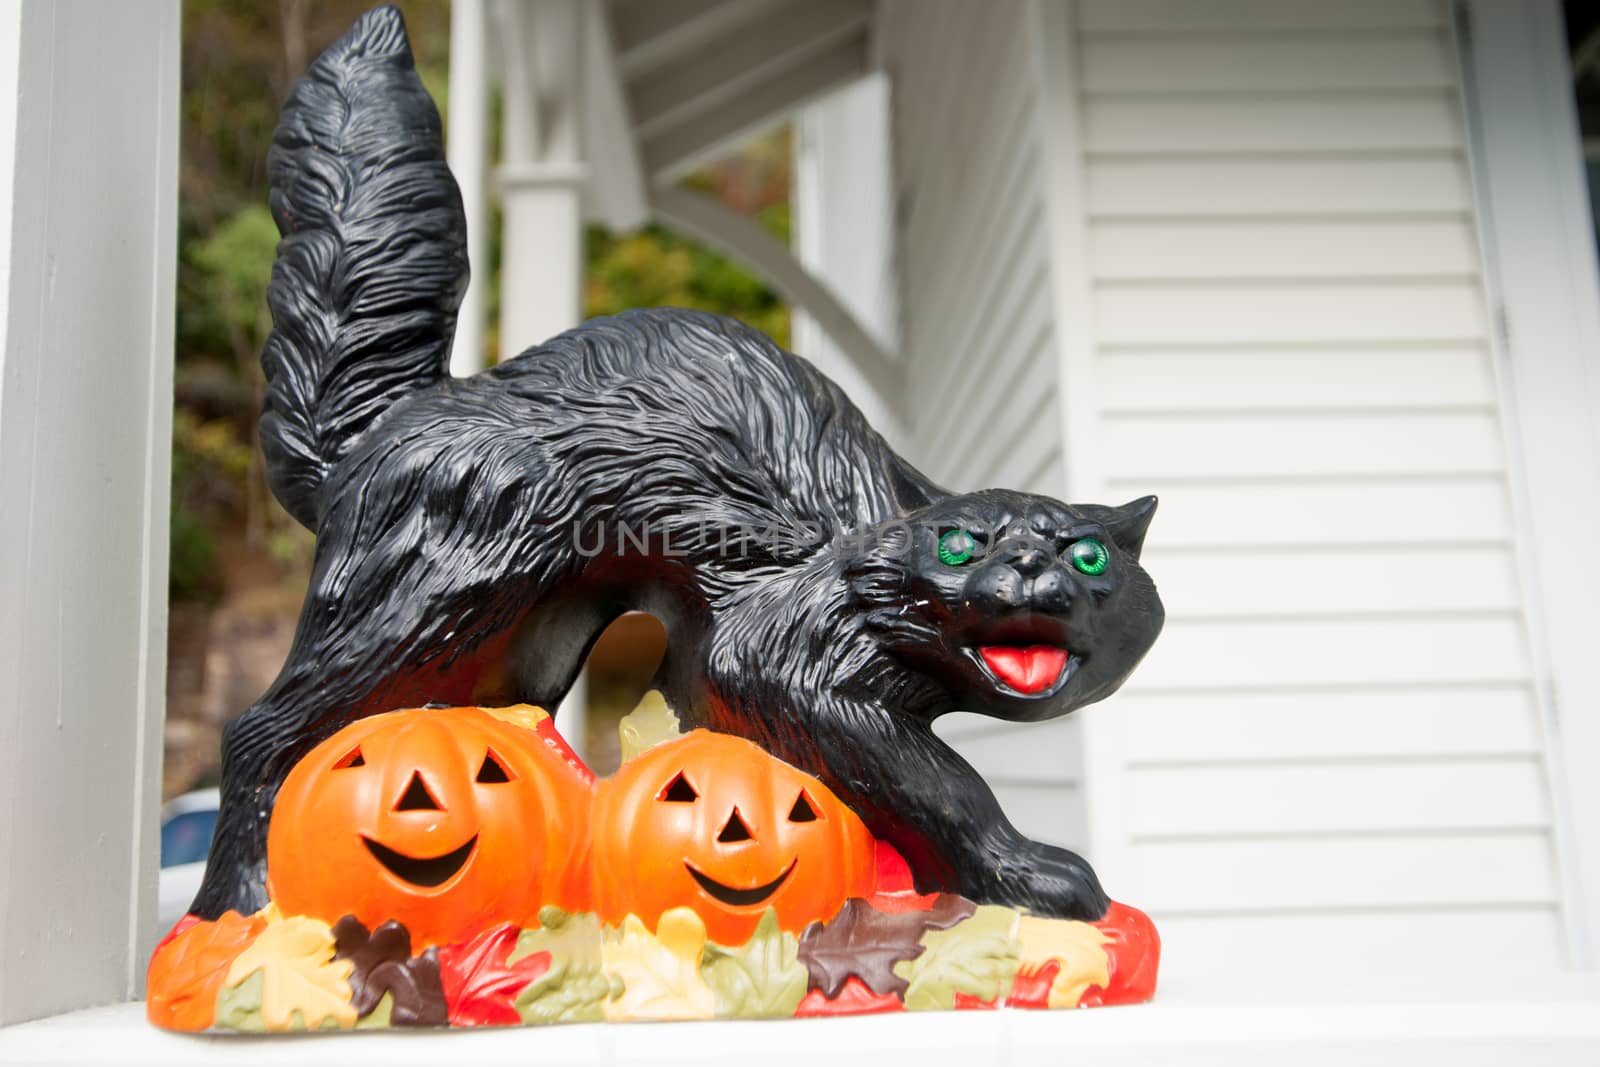 Black cat snarling while walking over jack o lantern face cutout by brians101